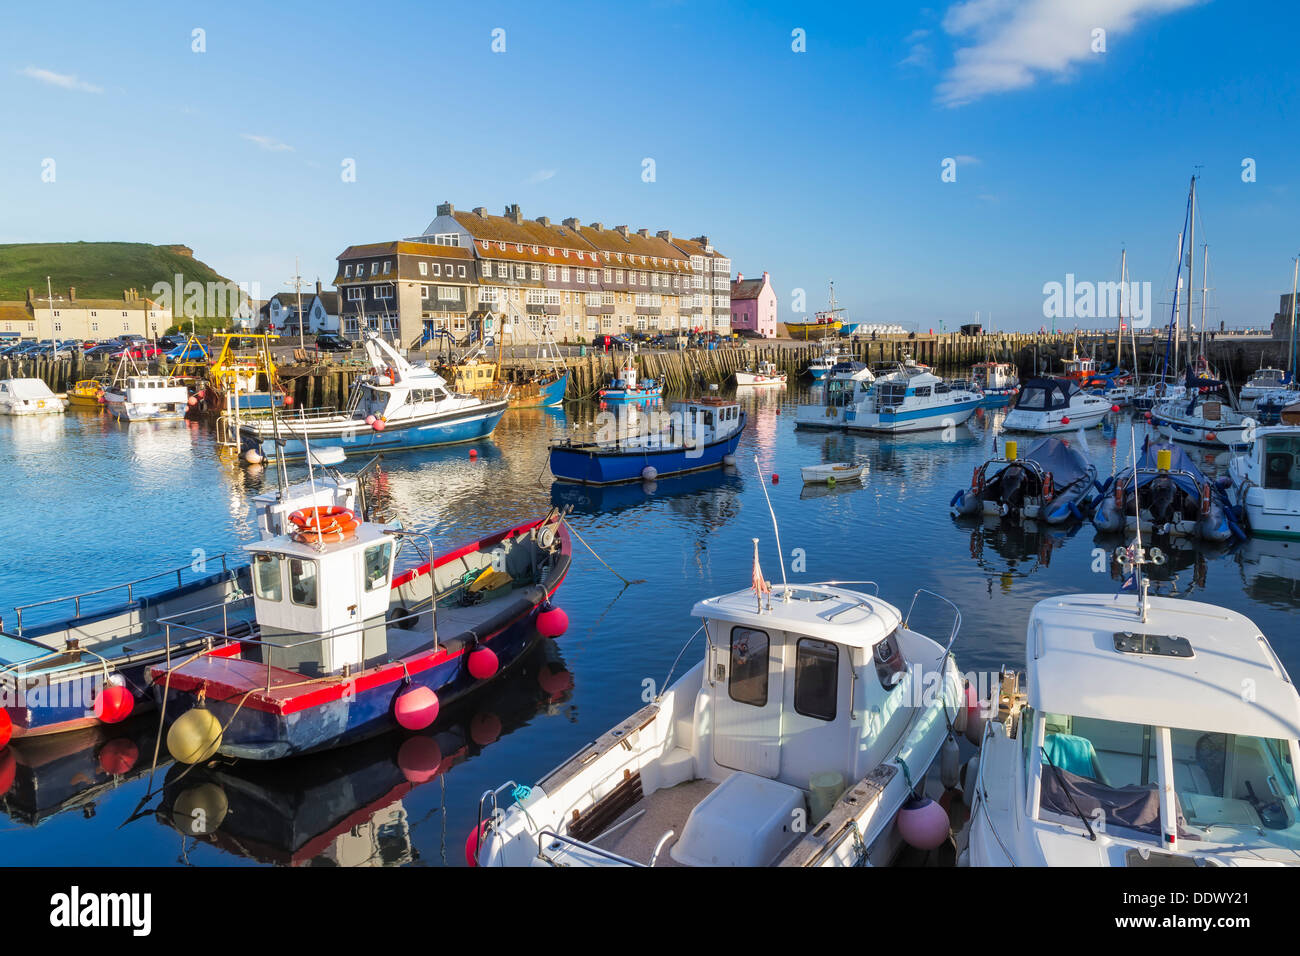 Fishing boats in West Bay Harbour Dorset England UK Europe Stock Photo